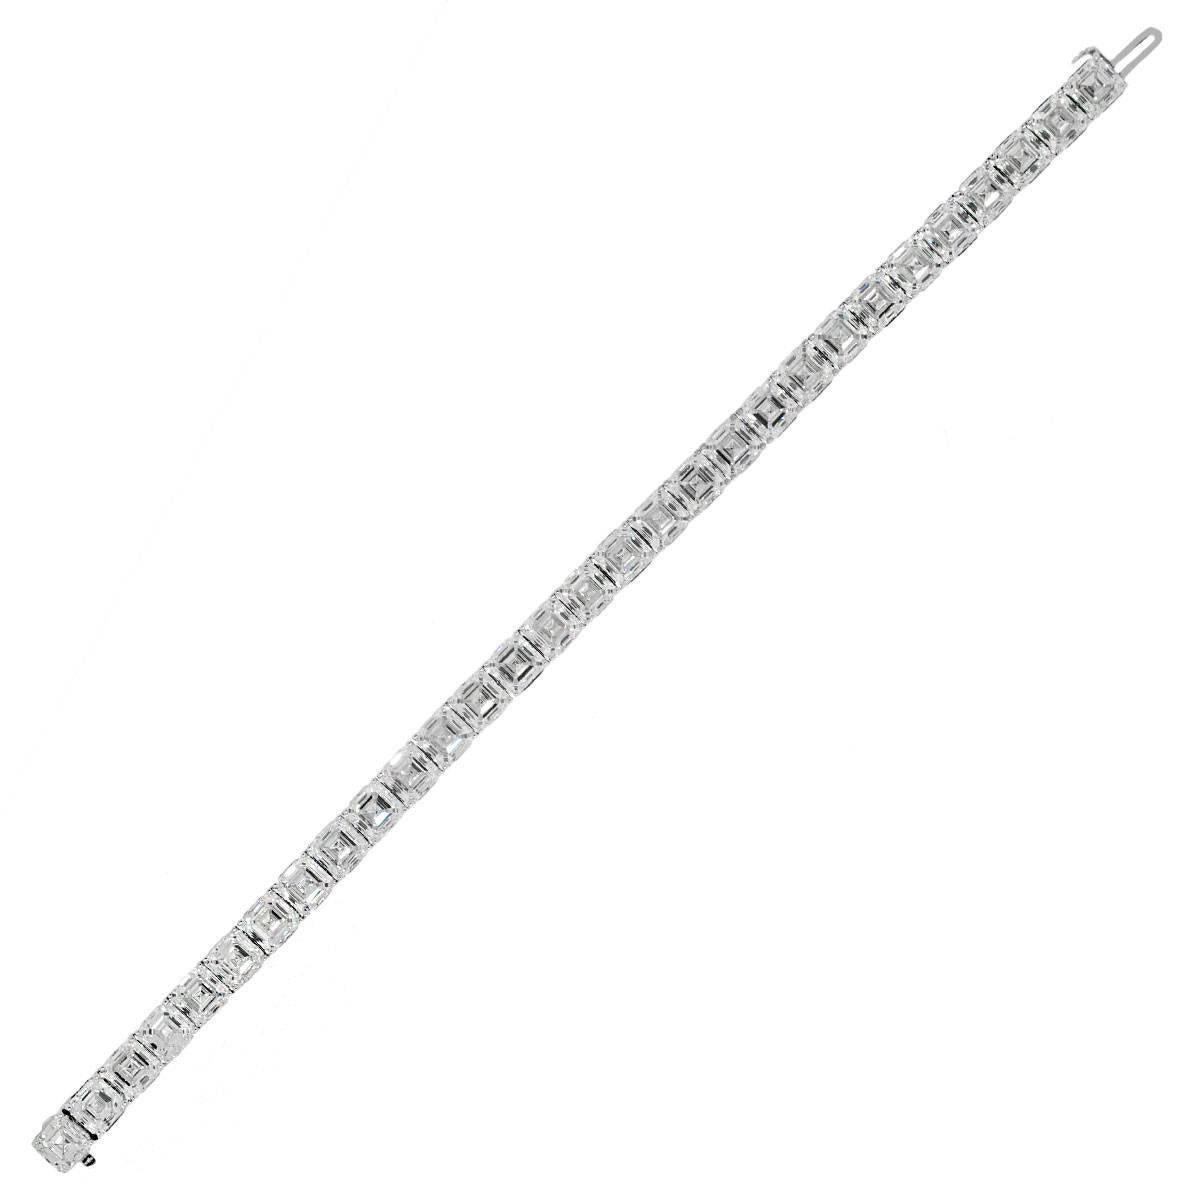 Material: 18k White Gold
Diamond Details: 30 asscher cut diamonds that have approximately 30.38ctw. Diamonds are F/H in color and VS in clarity.
Clasp: Tongue in box Clasp
Total Weight: 20.1g (12.9dwt)
Measurements: Will fit a 7